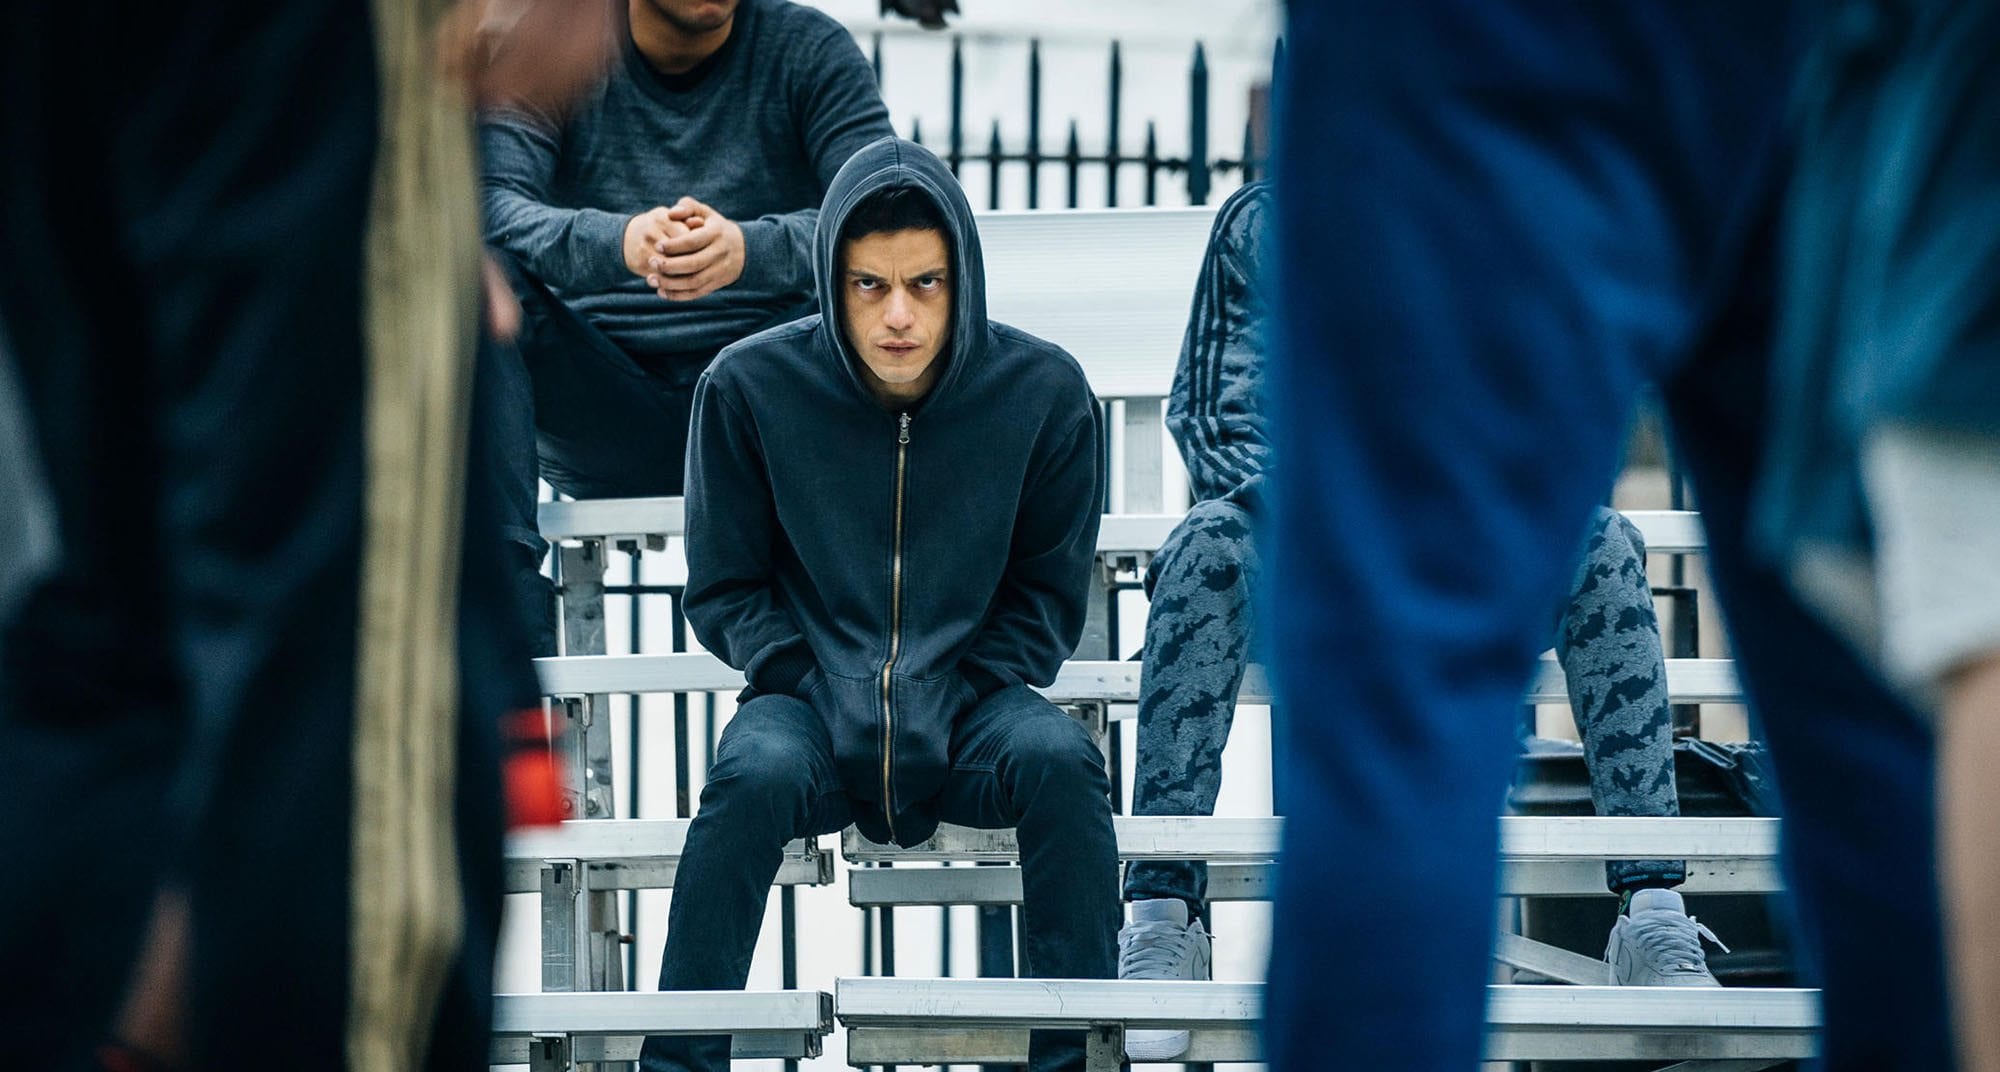 Mr. Robot S3 thrusts its principal character Elliot Alderson and his alternate personality Mr. Robot into a further state of war.